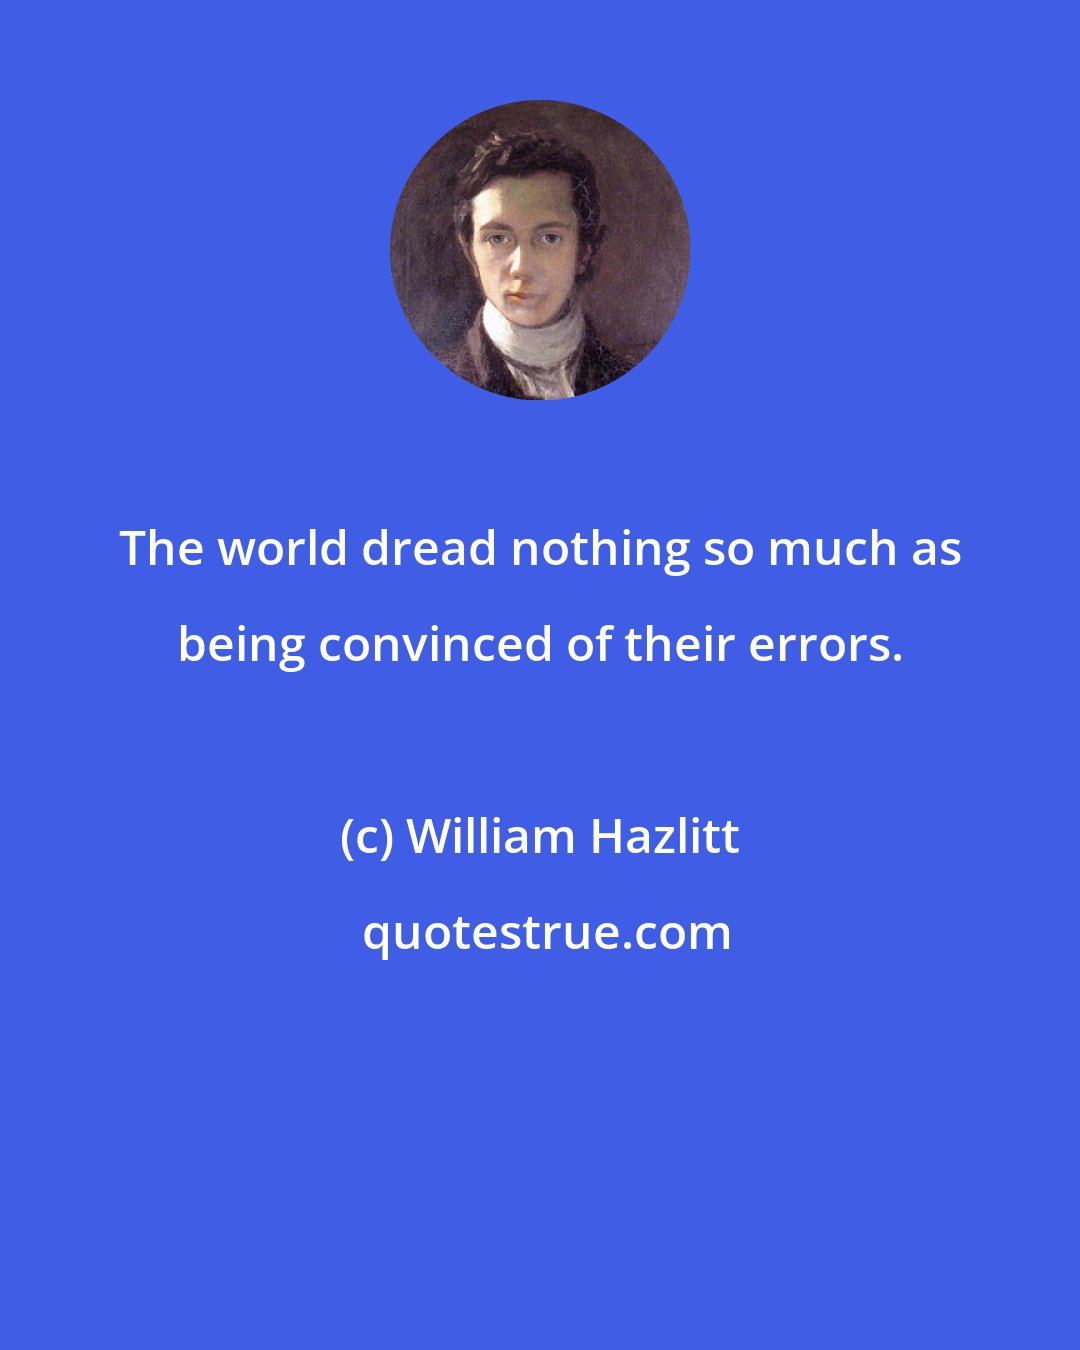 William Hazlitt: The world dread nothing so much as being convinced of their errors.